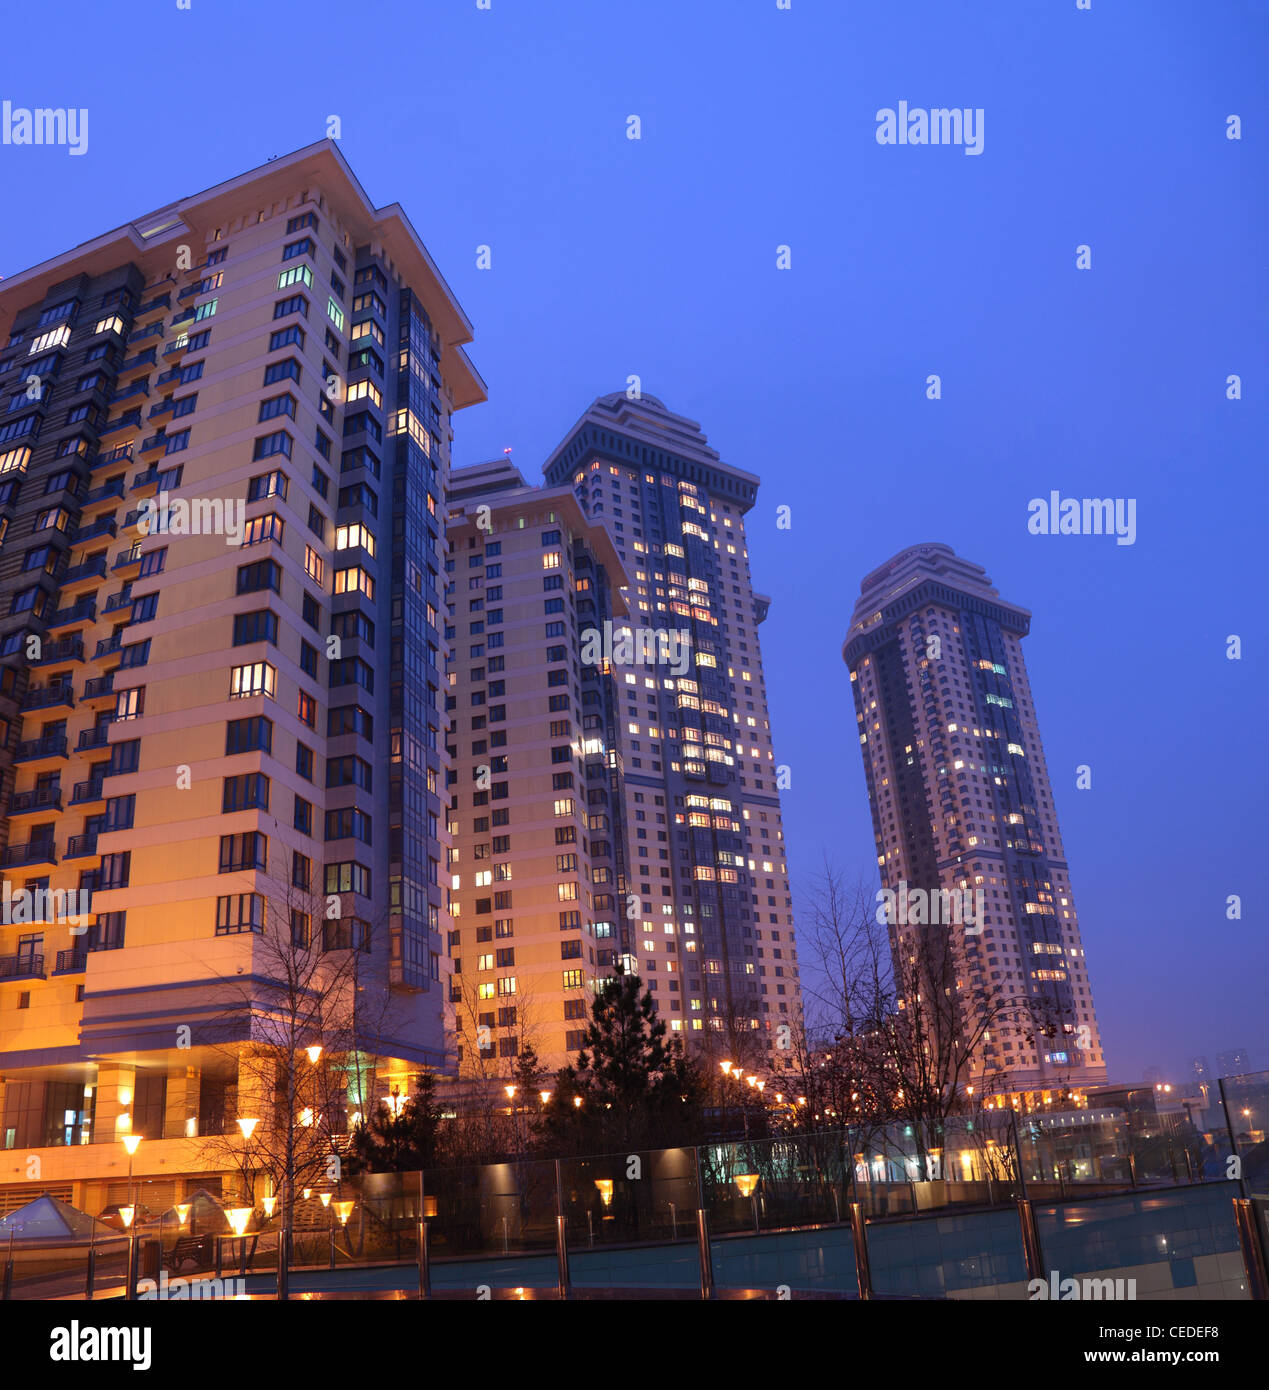 Apartment houses at evening Stock Photo